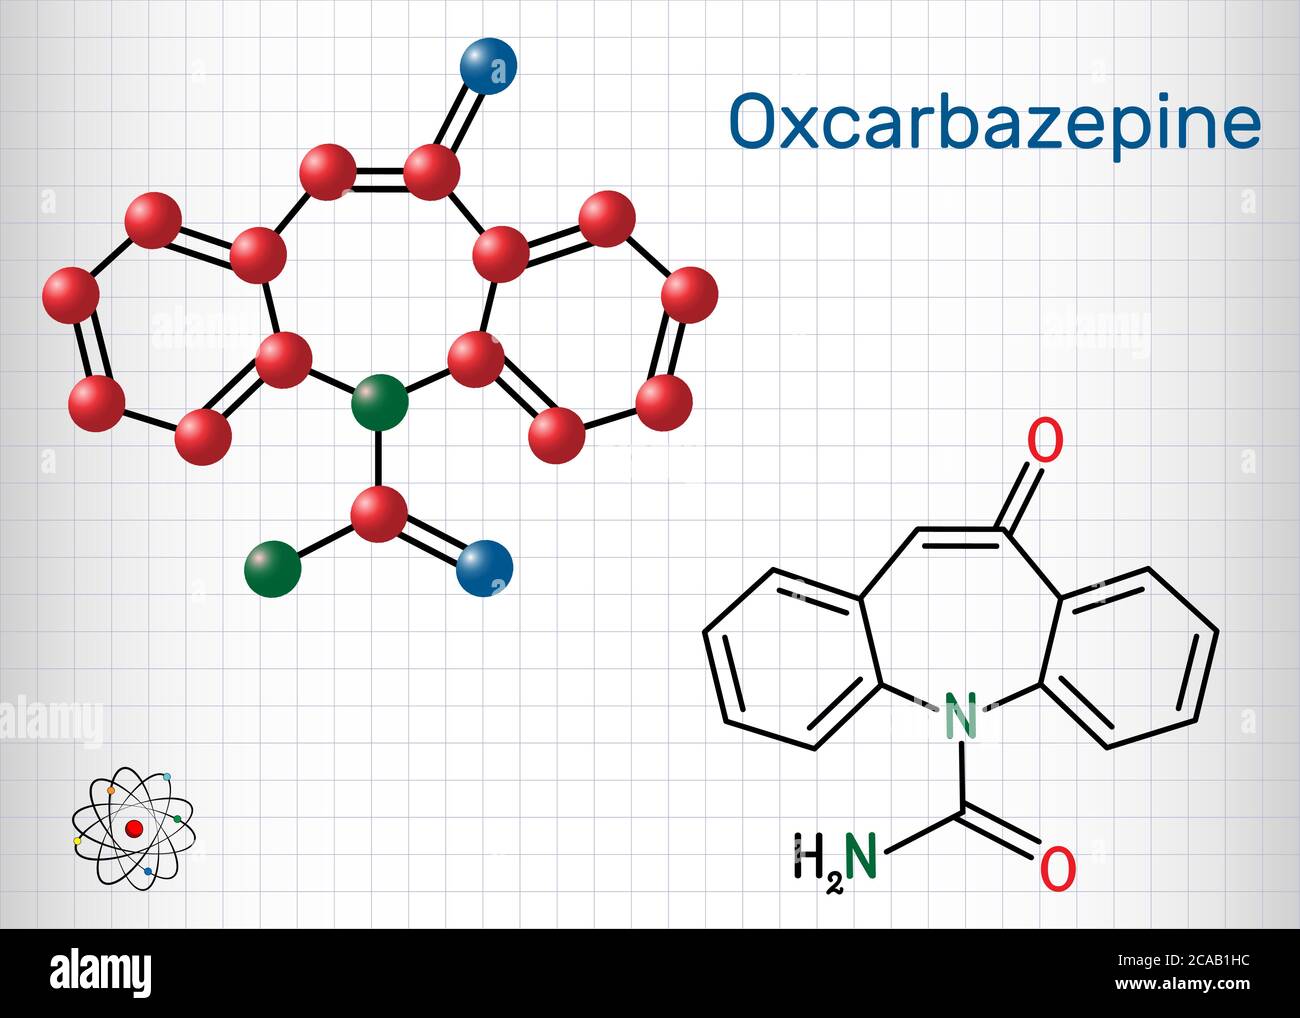 Oxcarbazepine, C15H12N2O2 molecule. It is antiepileptic, anticonvulsant drug used in treatment of seizures, epilepsy, bipolar disorder. Sheet of paper Stock Vector